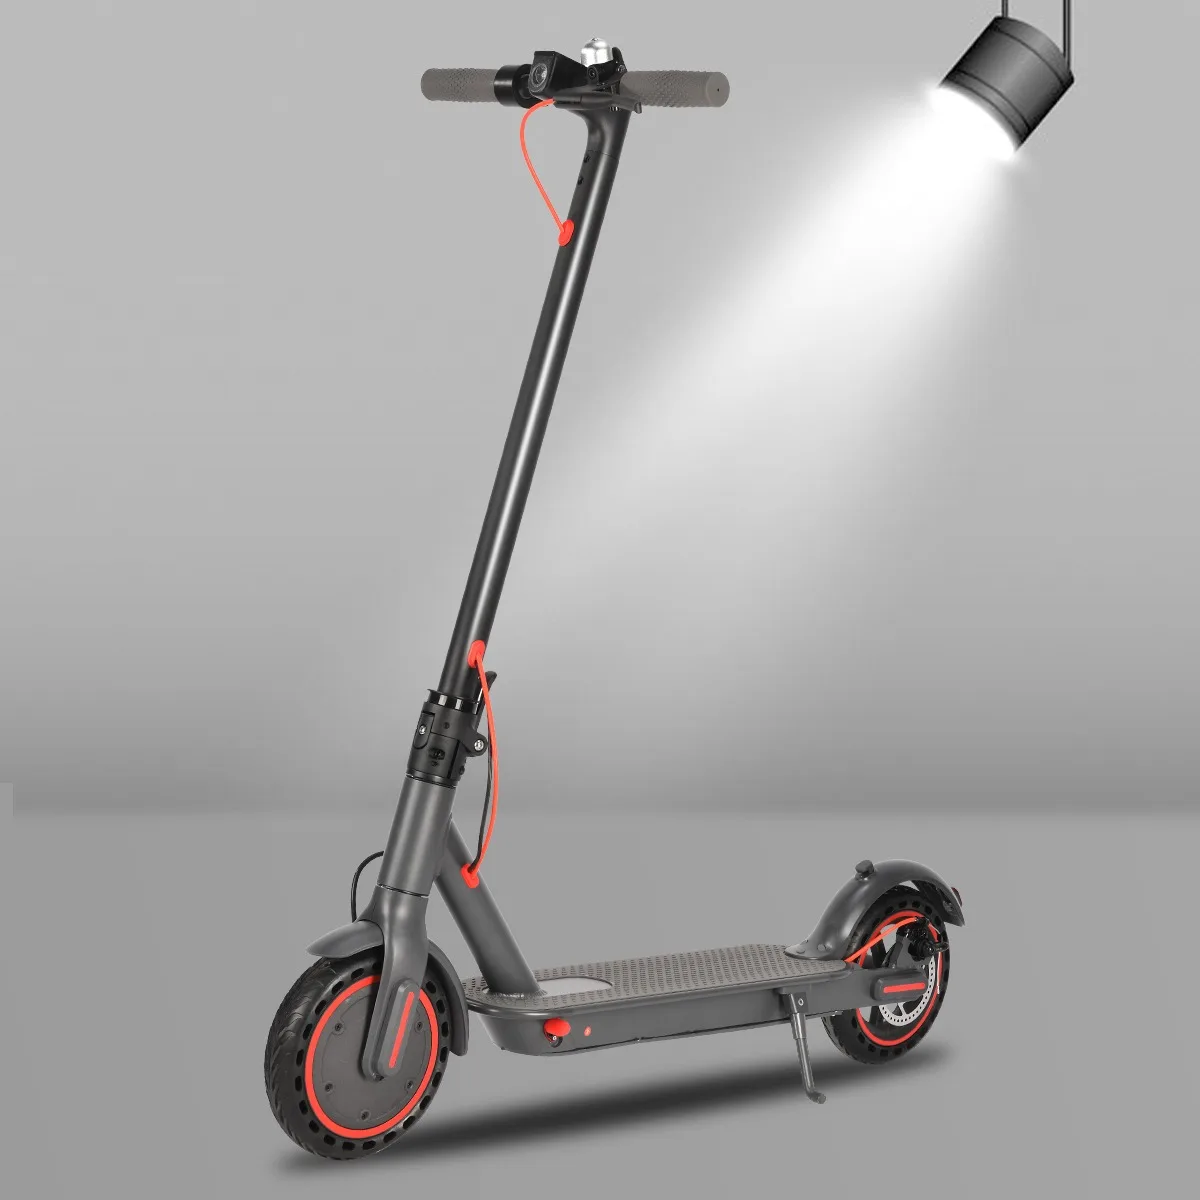 Free Shipping Electric Scooter Waterproof 25mph 350w Scooter Electric EU UK Warehouse Electric Foldable Scooters For Adult